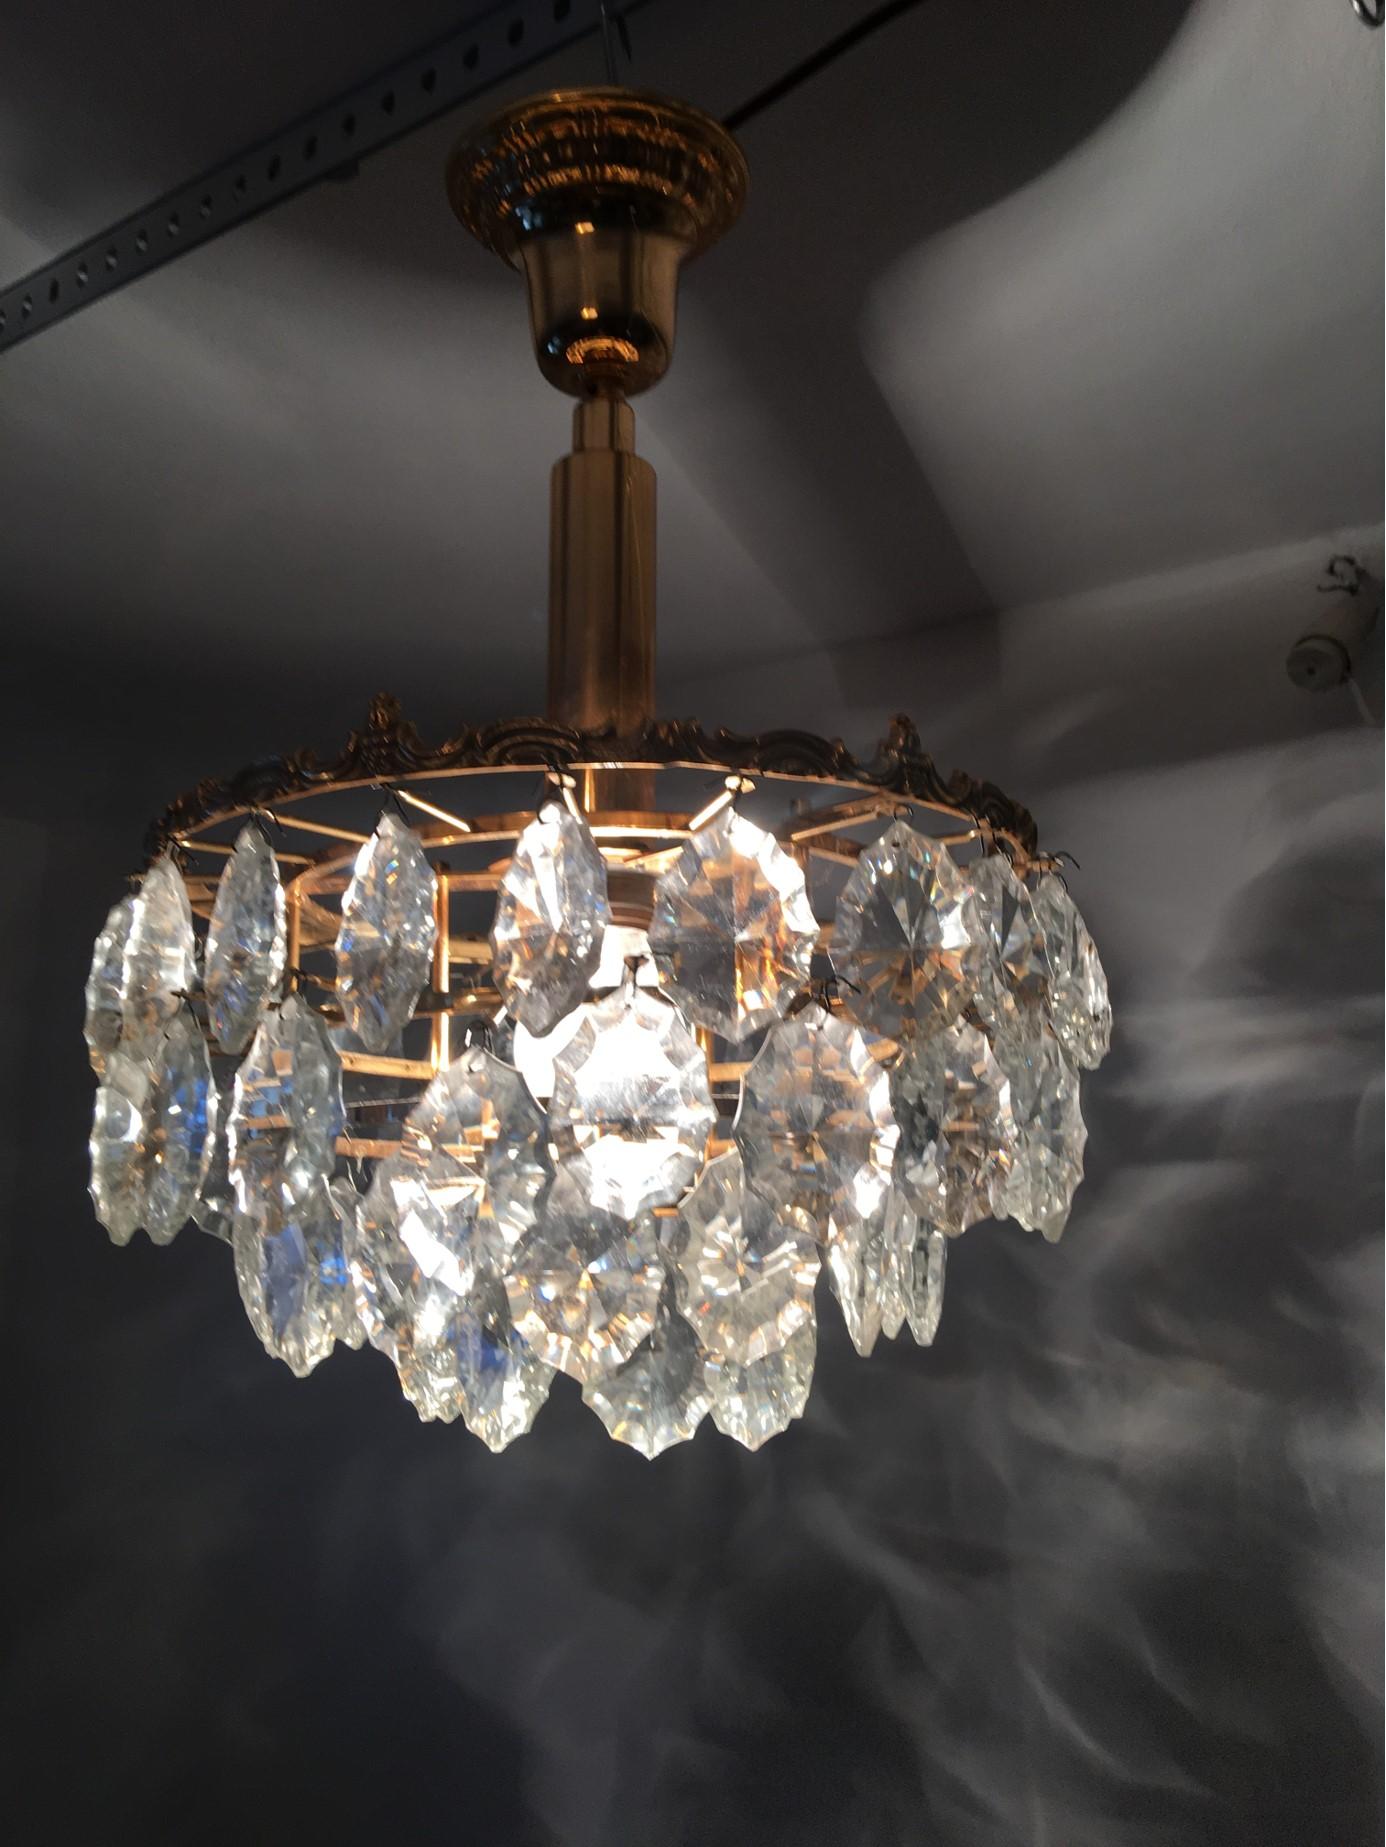 Very lovely ceiling light fixture. Made of golden plated copper in the style of the famous Austrian manufacturer Bakalowits. We were also able to obtain four extra Chrystal which will be included as replacement parts if ever needed. The light